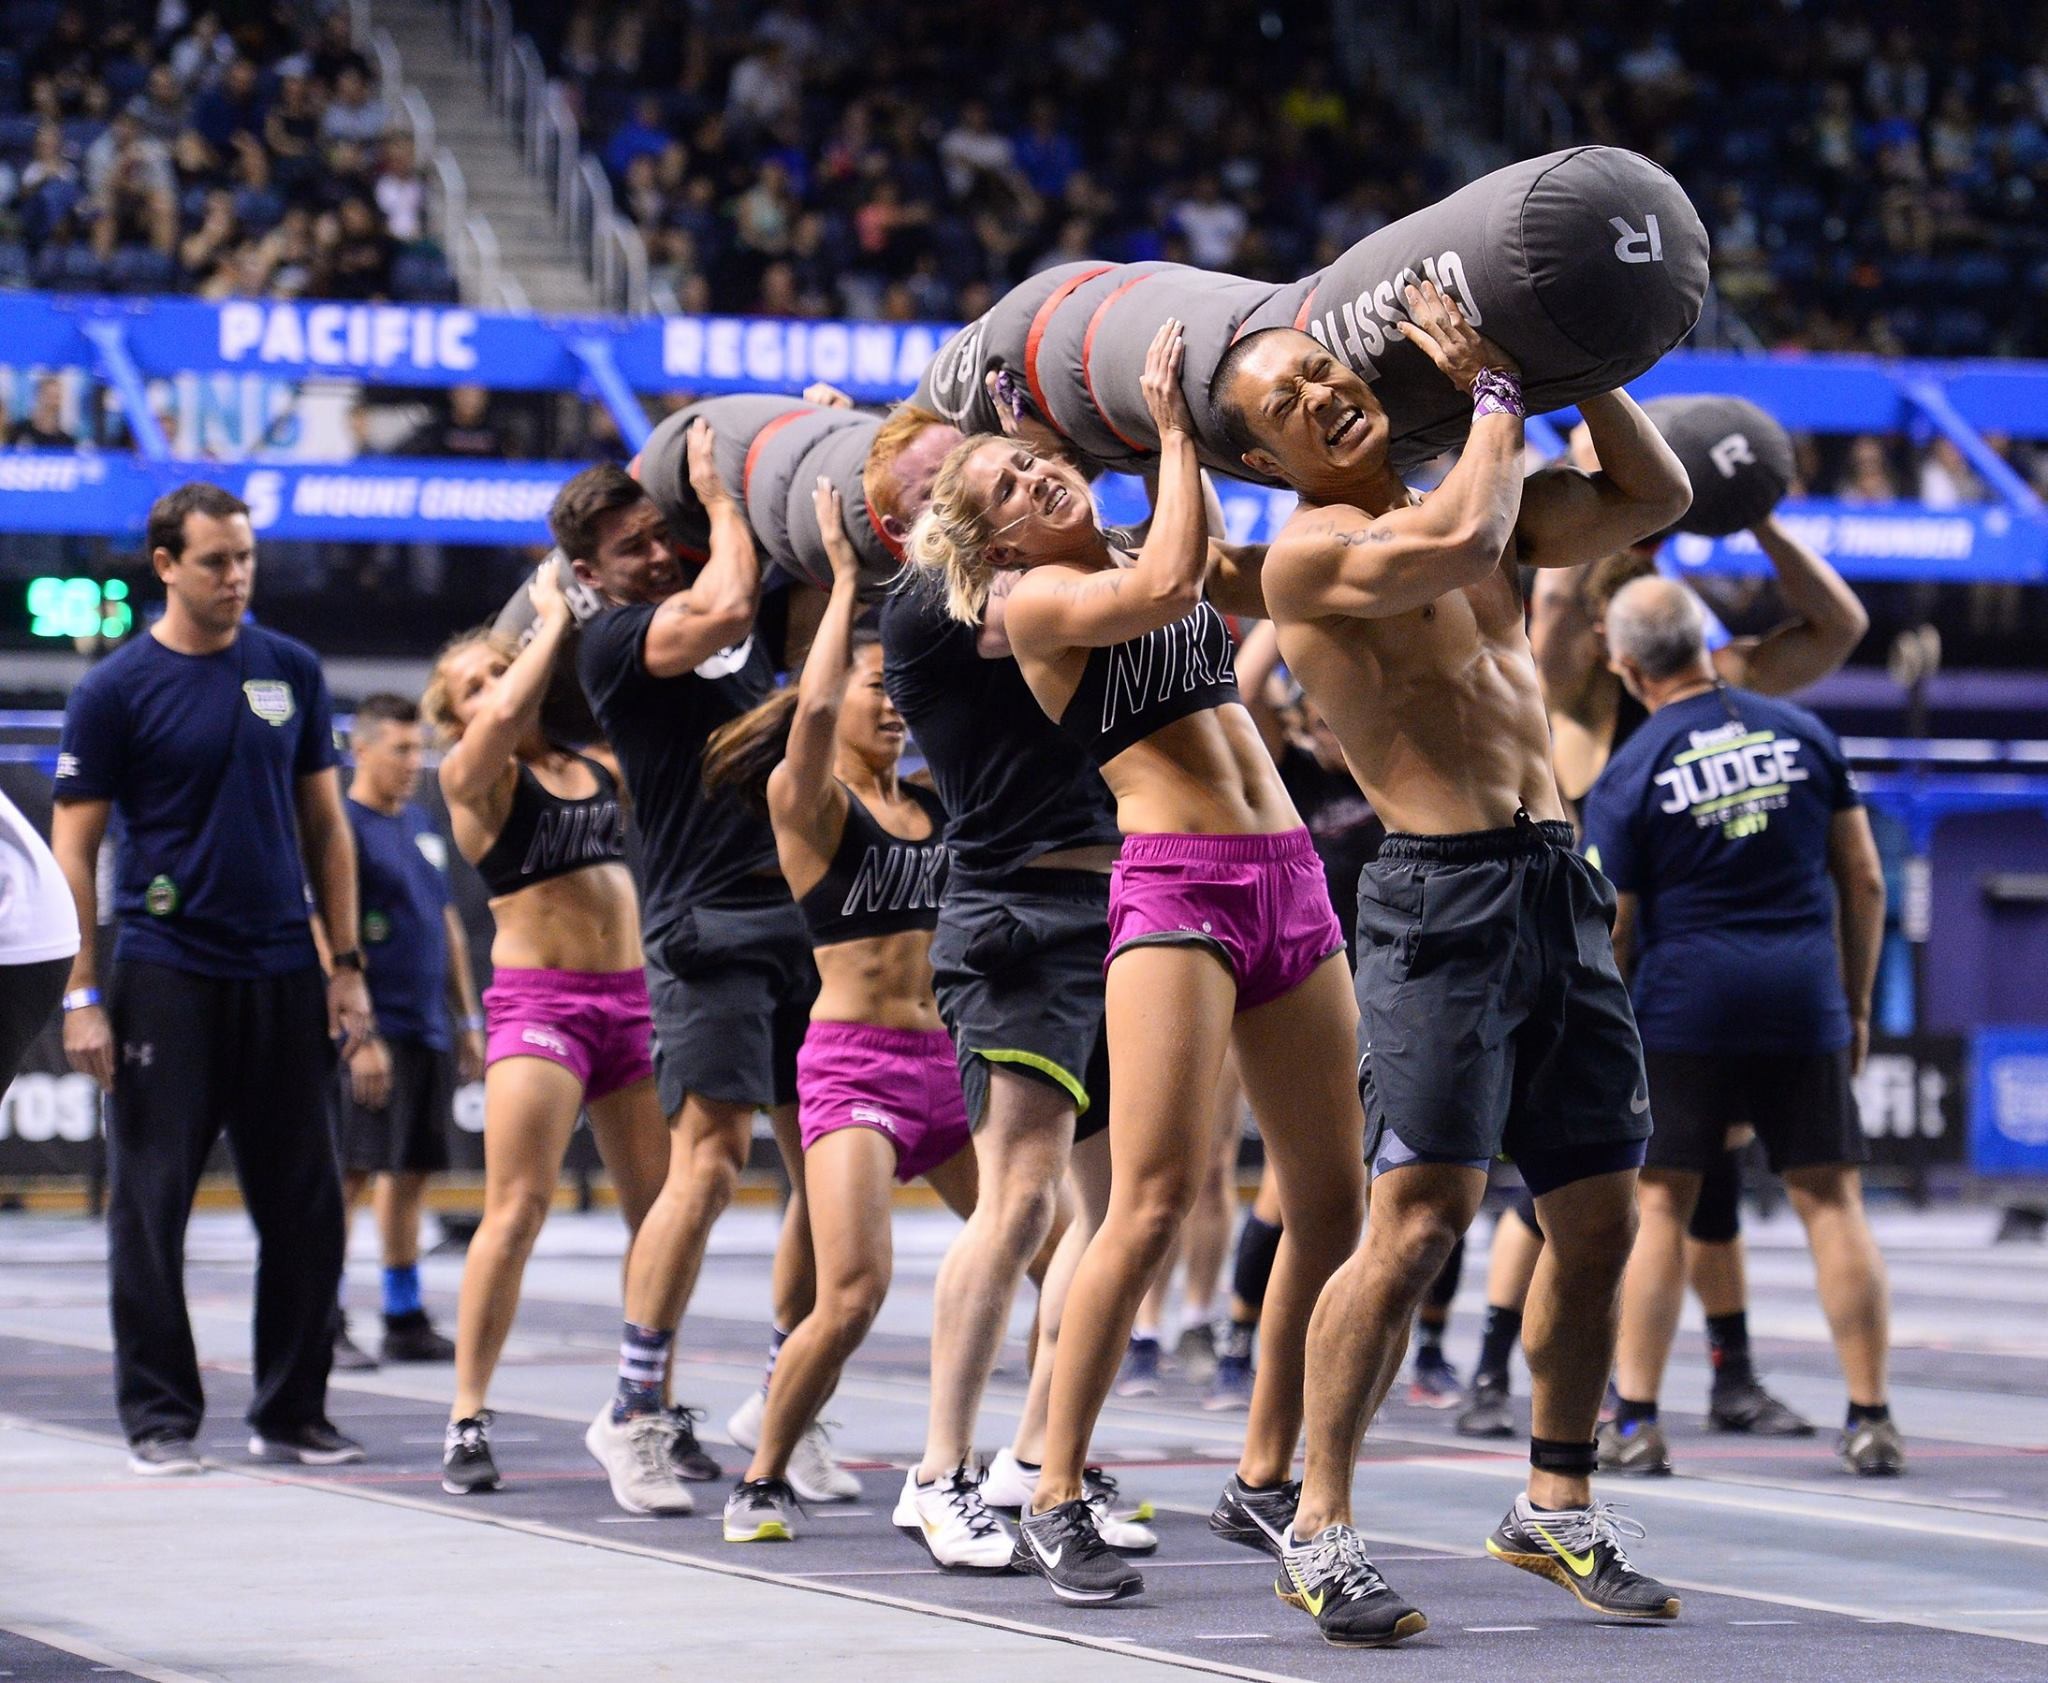 Coastal CrossFit get to grips with the worm became Asia’s fittest team at this year’s regionals. heir success boiled down to preparation on the ‘worm’ Photos: CrossFit Games